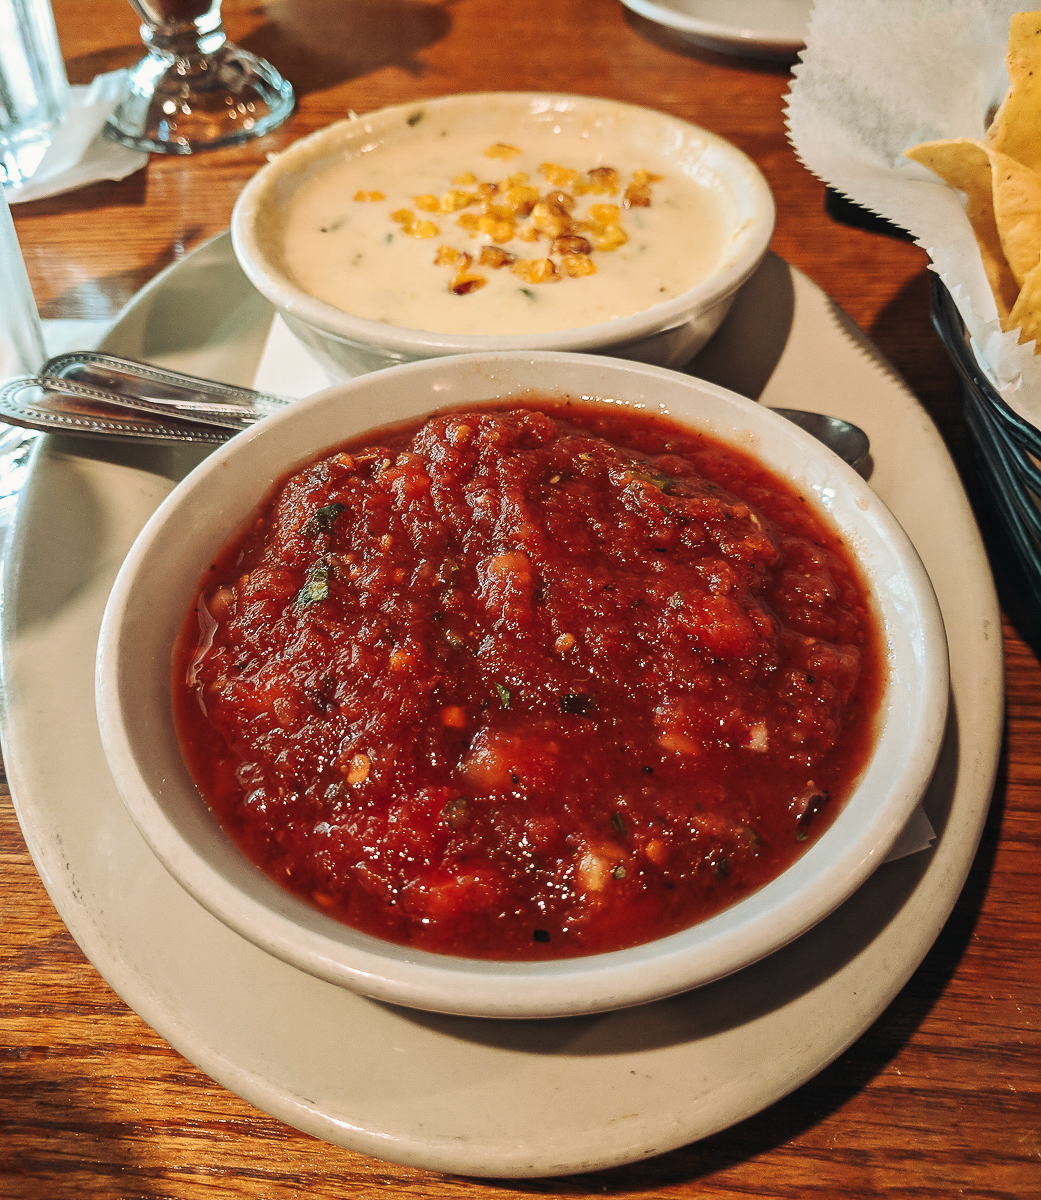 cheese dip and salsa at Red Door - one of the best places to eat in Little Rock